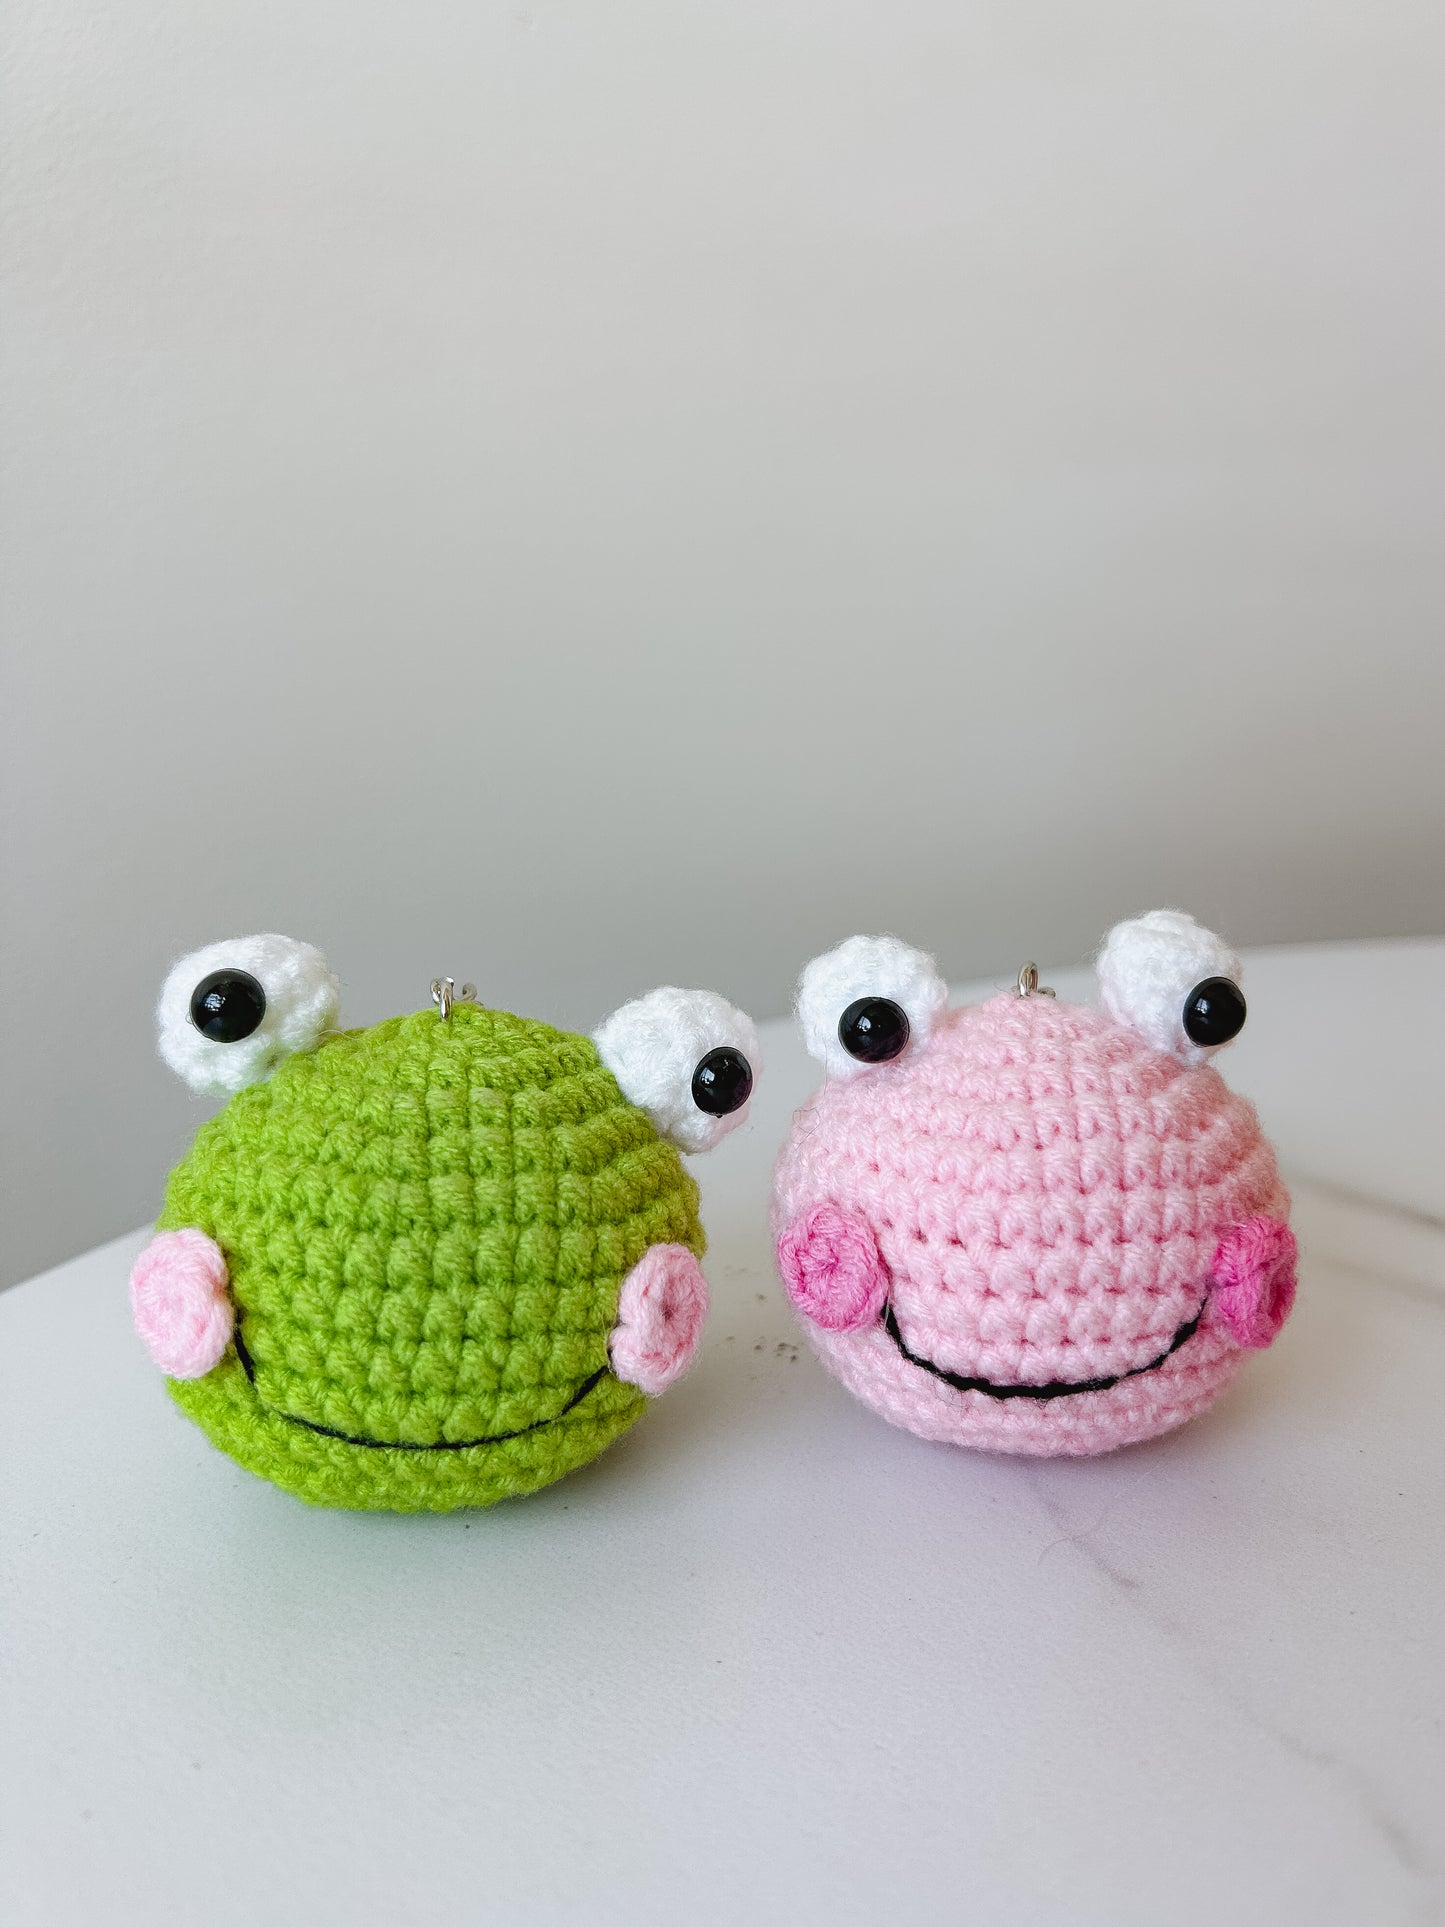 Frog style Crochted keychains - crafted by Churi